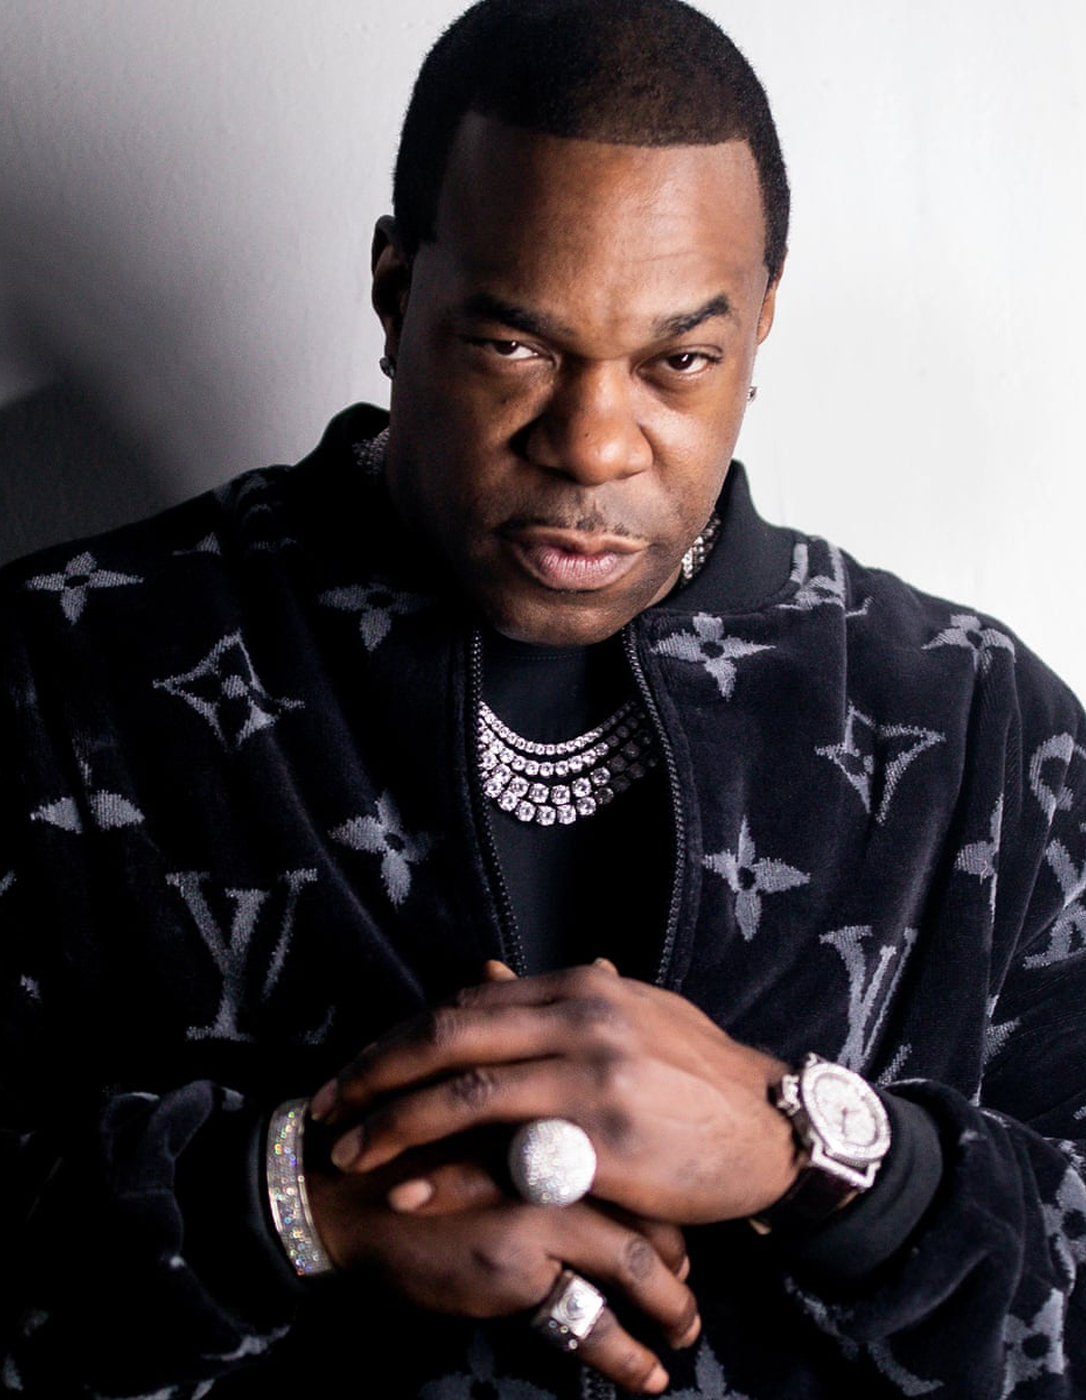 Busta Rhymes - Access all artists